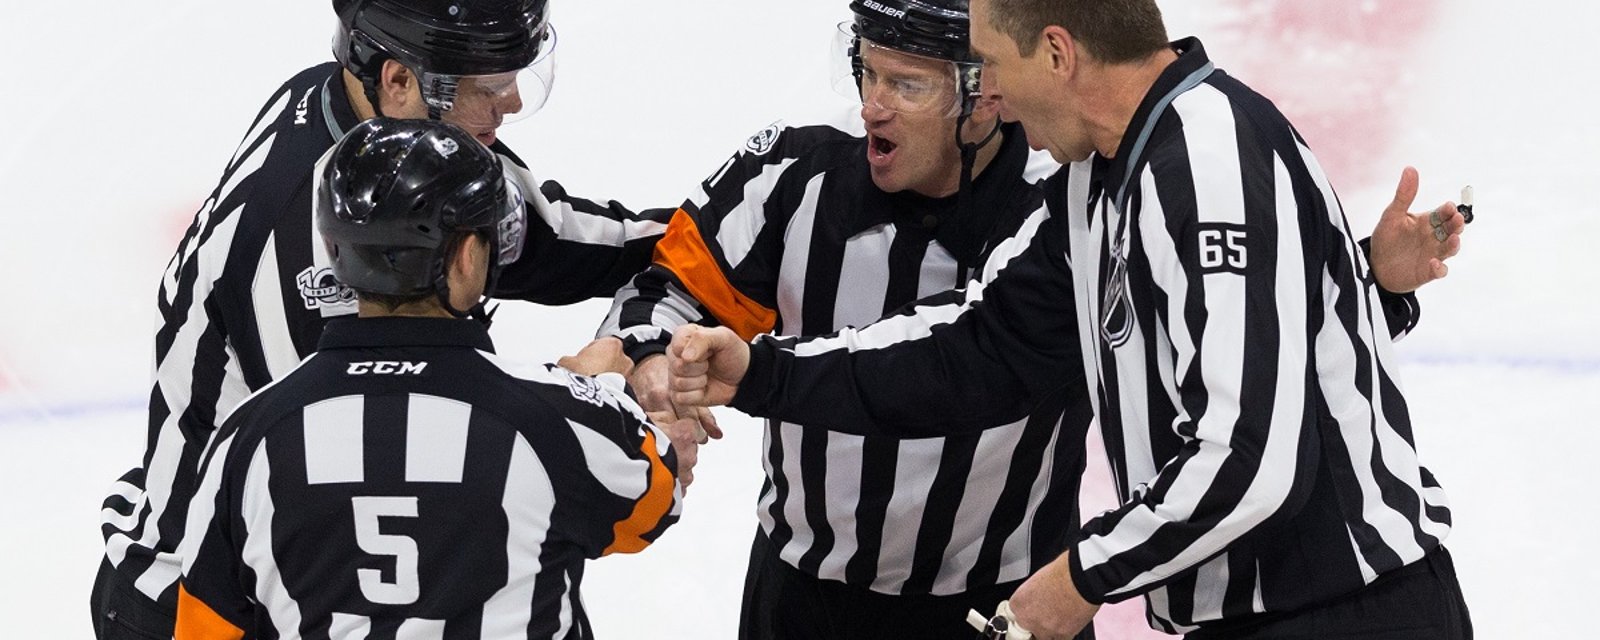 Controversy in Game 4 after NHL officials miss a blatant call.